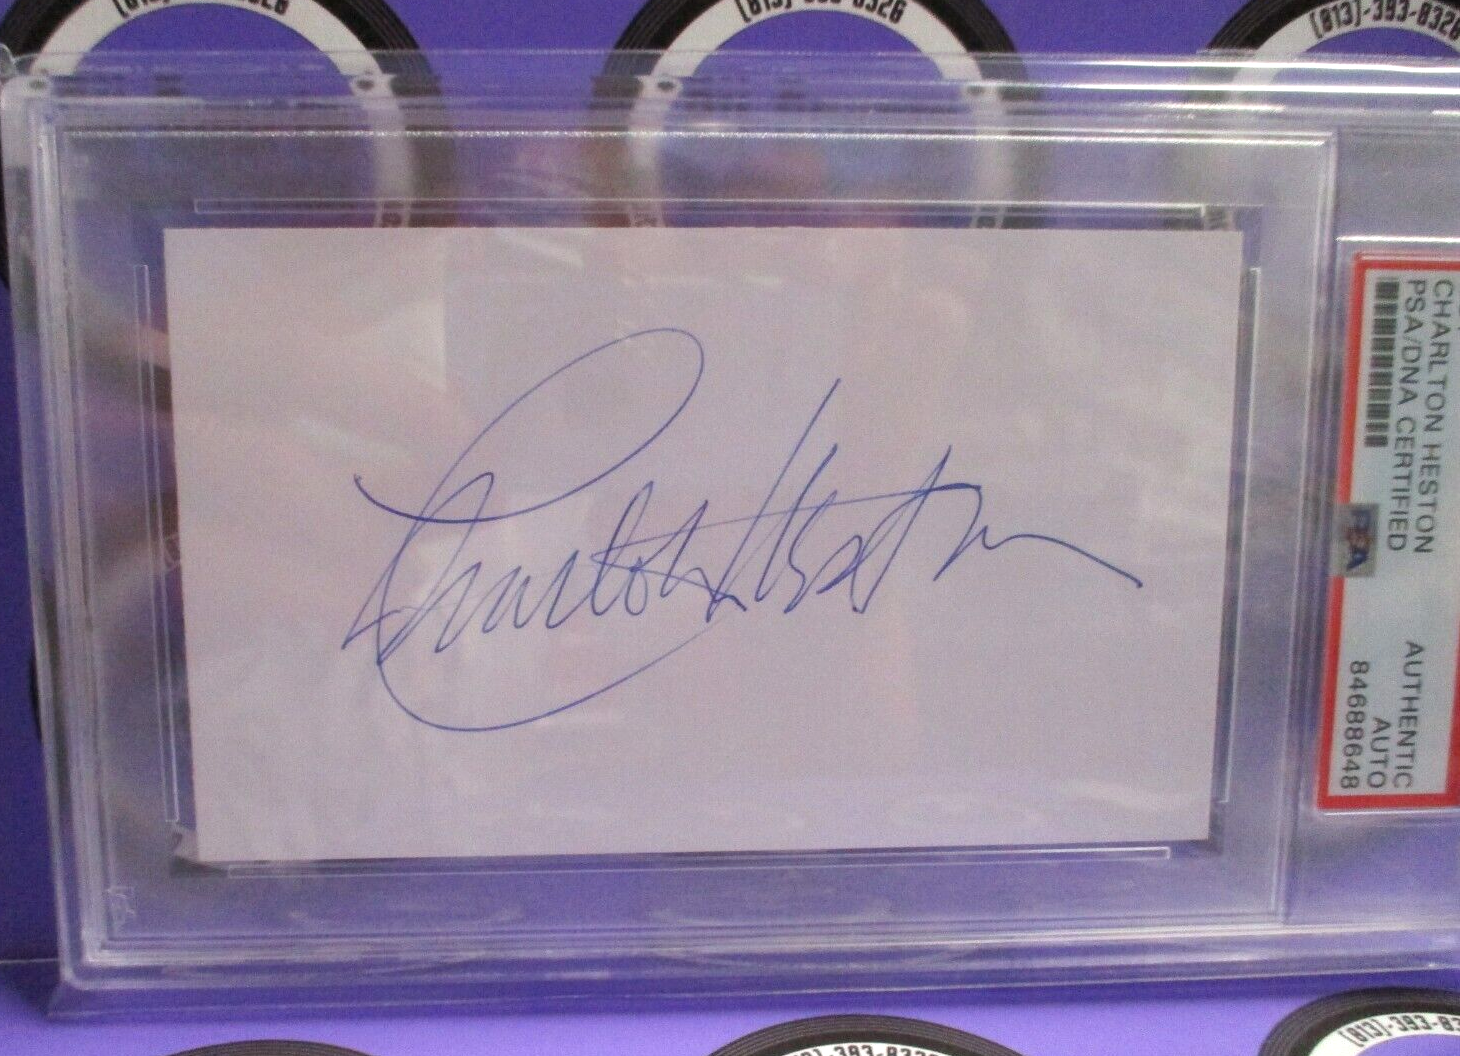 Charlton Heston Autographed Index Card Signed by PSA Certified #84688648 Slabbed